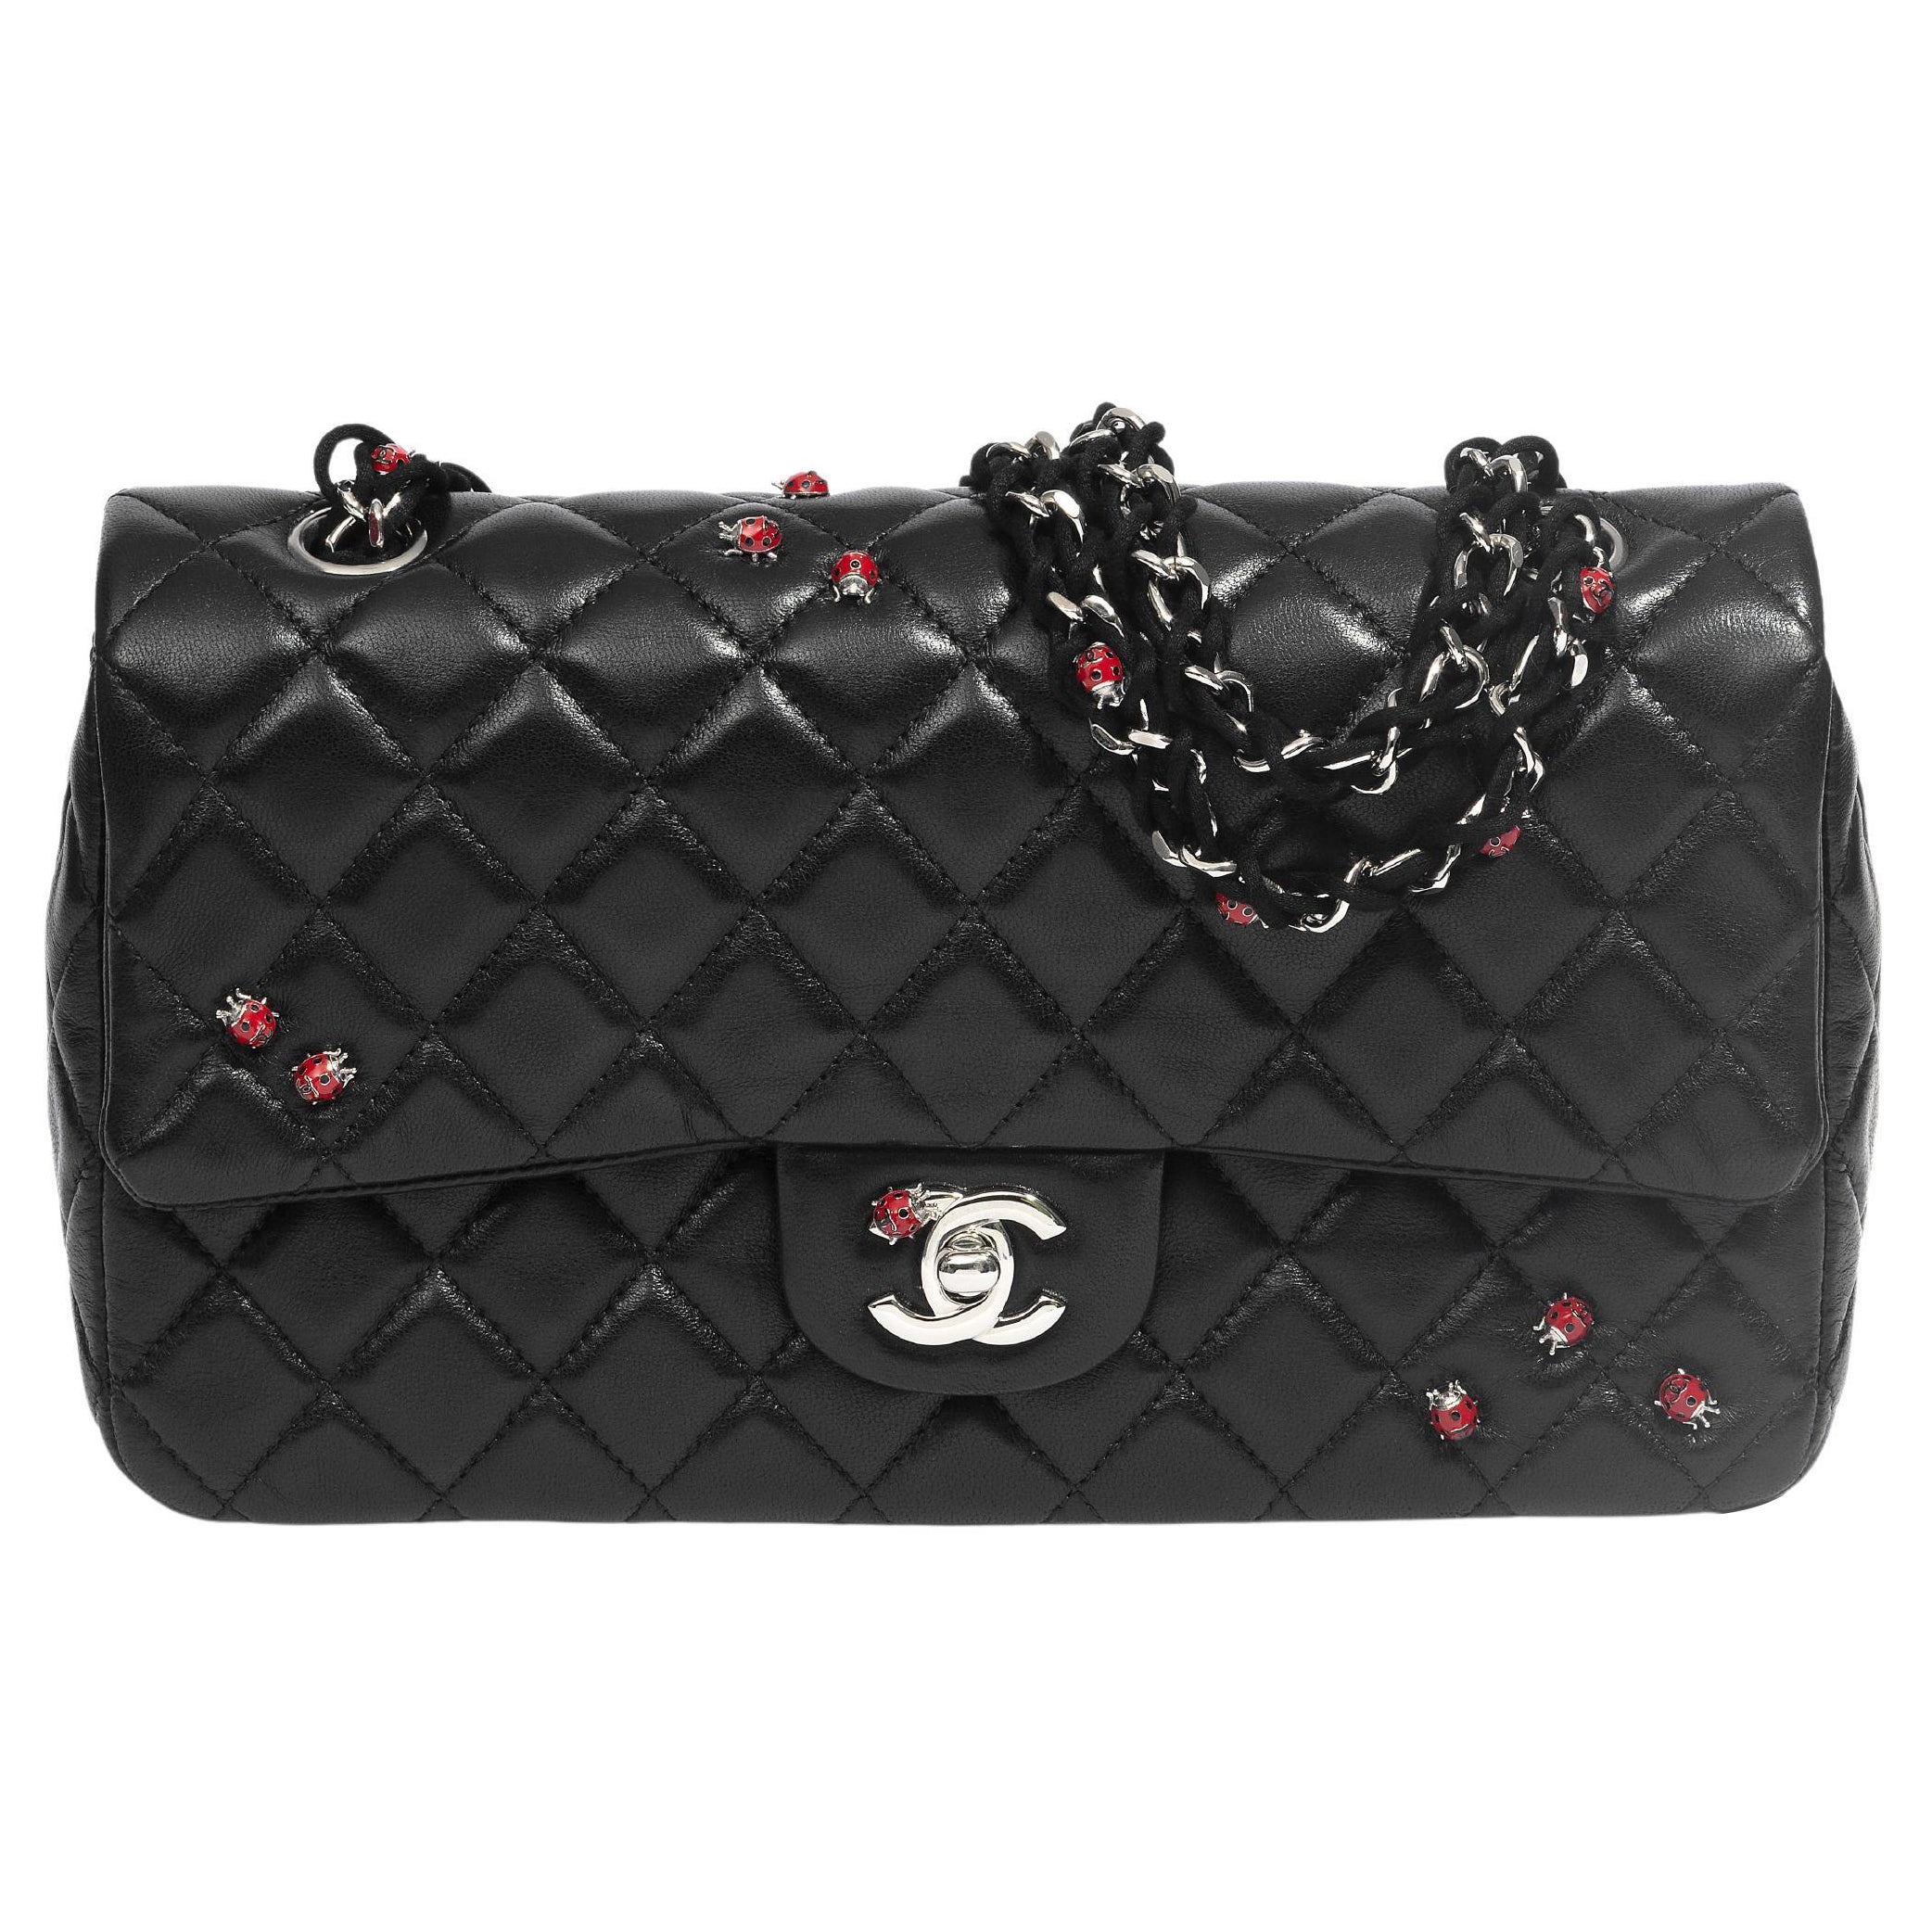 What is the classic Chanel bag called?